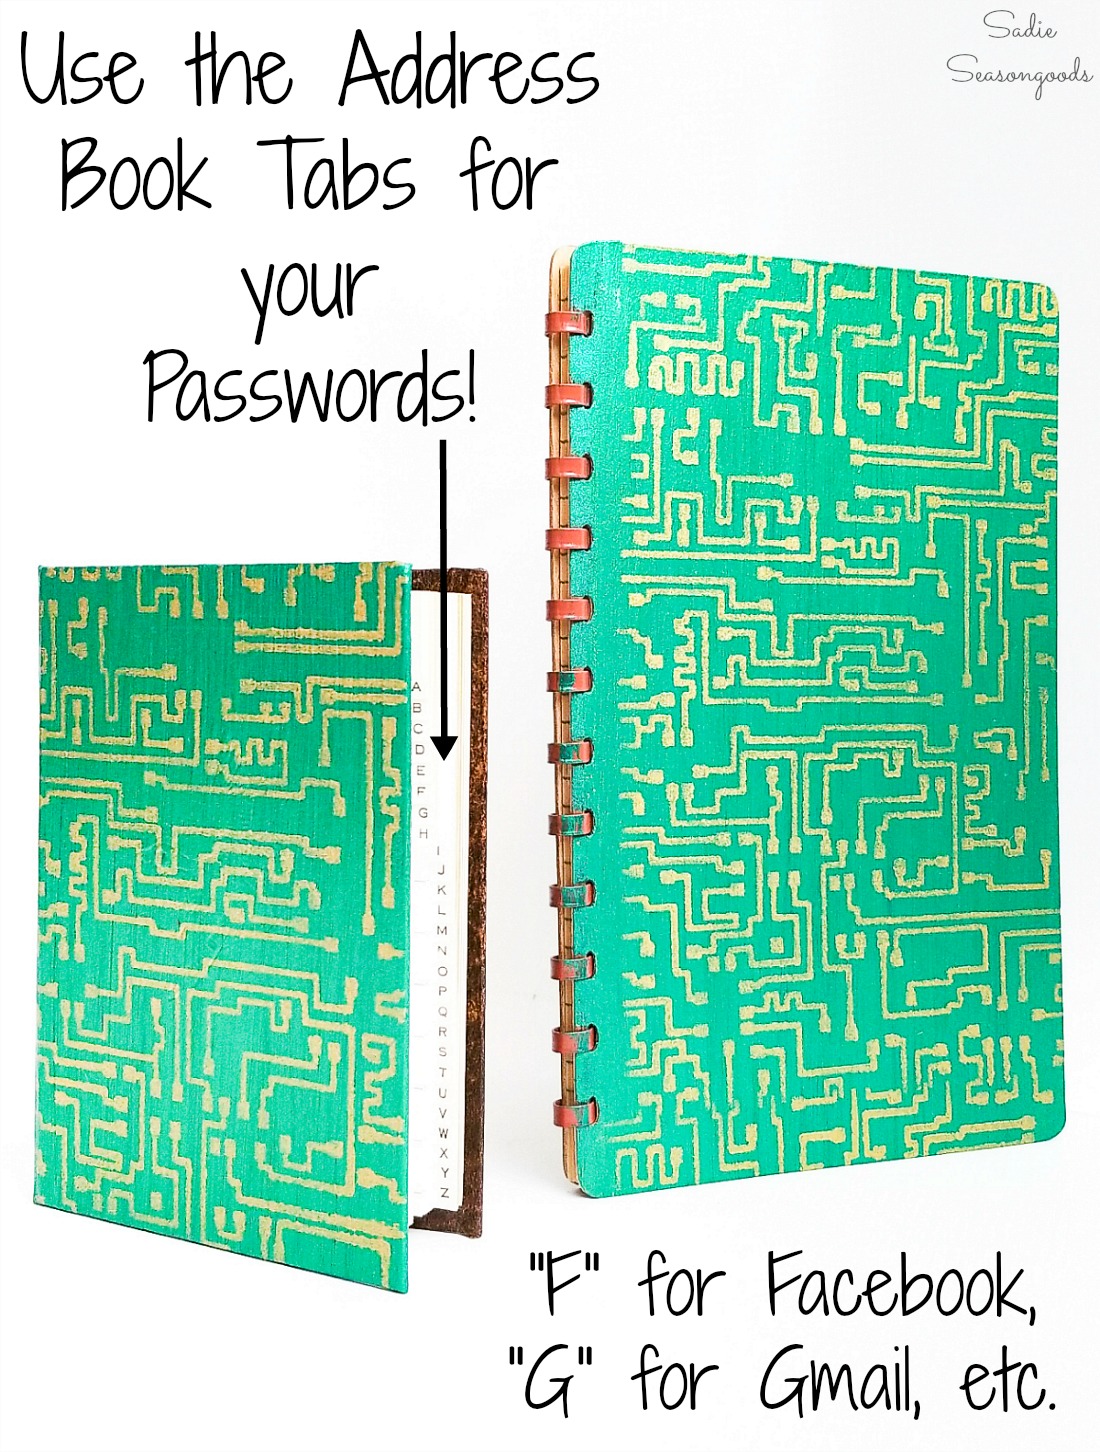 Password book from a phone address book that has been painted